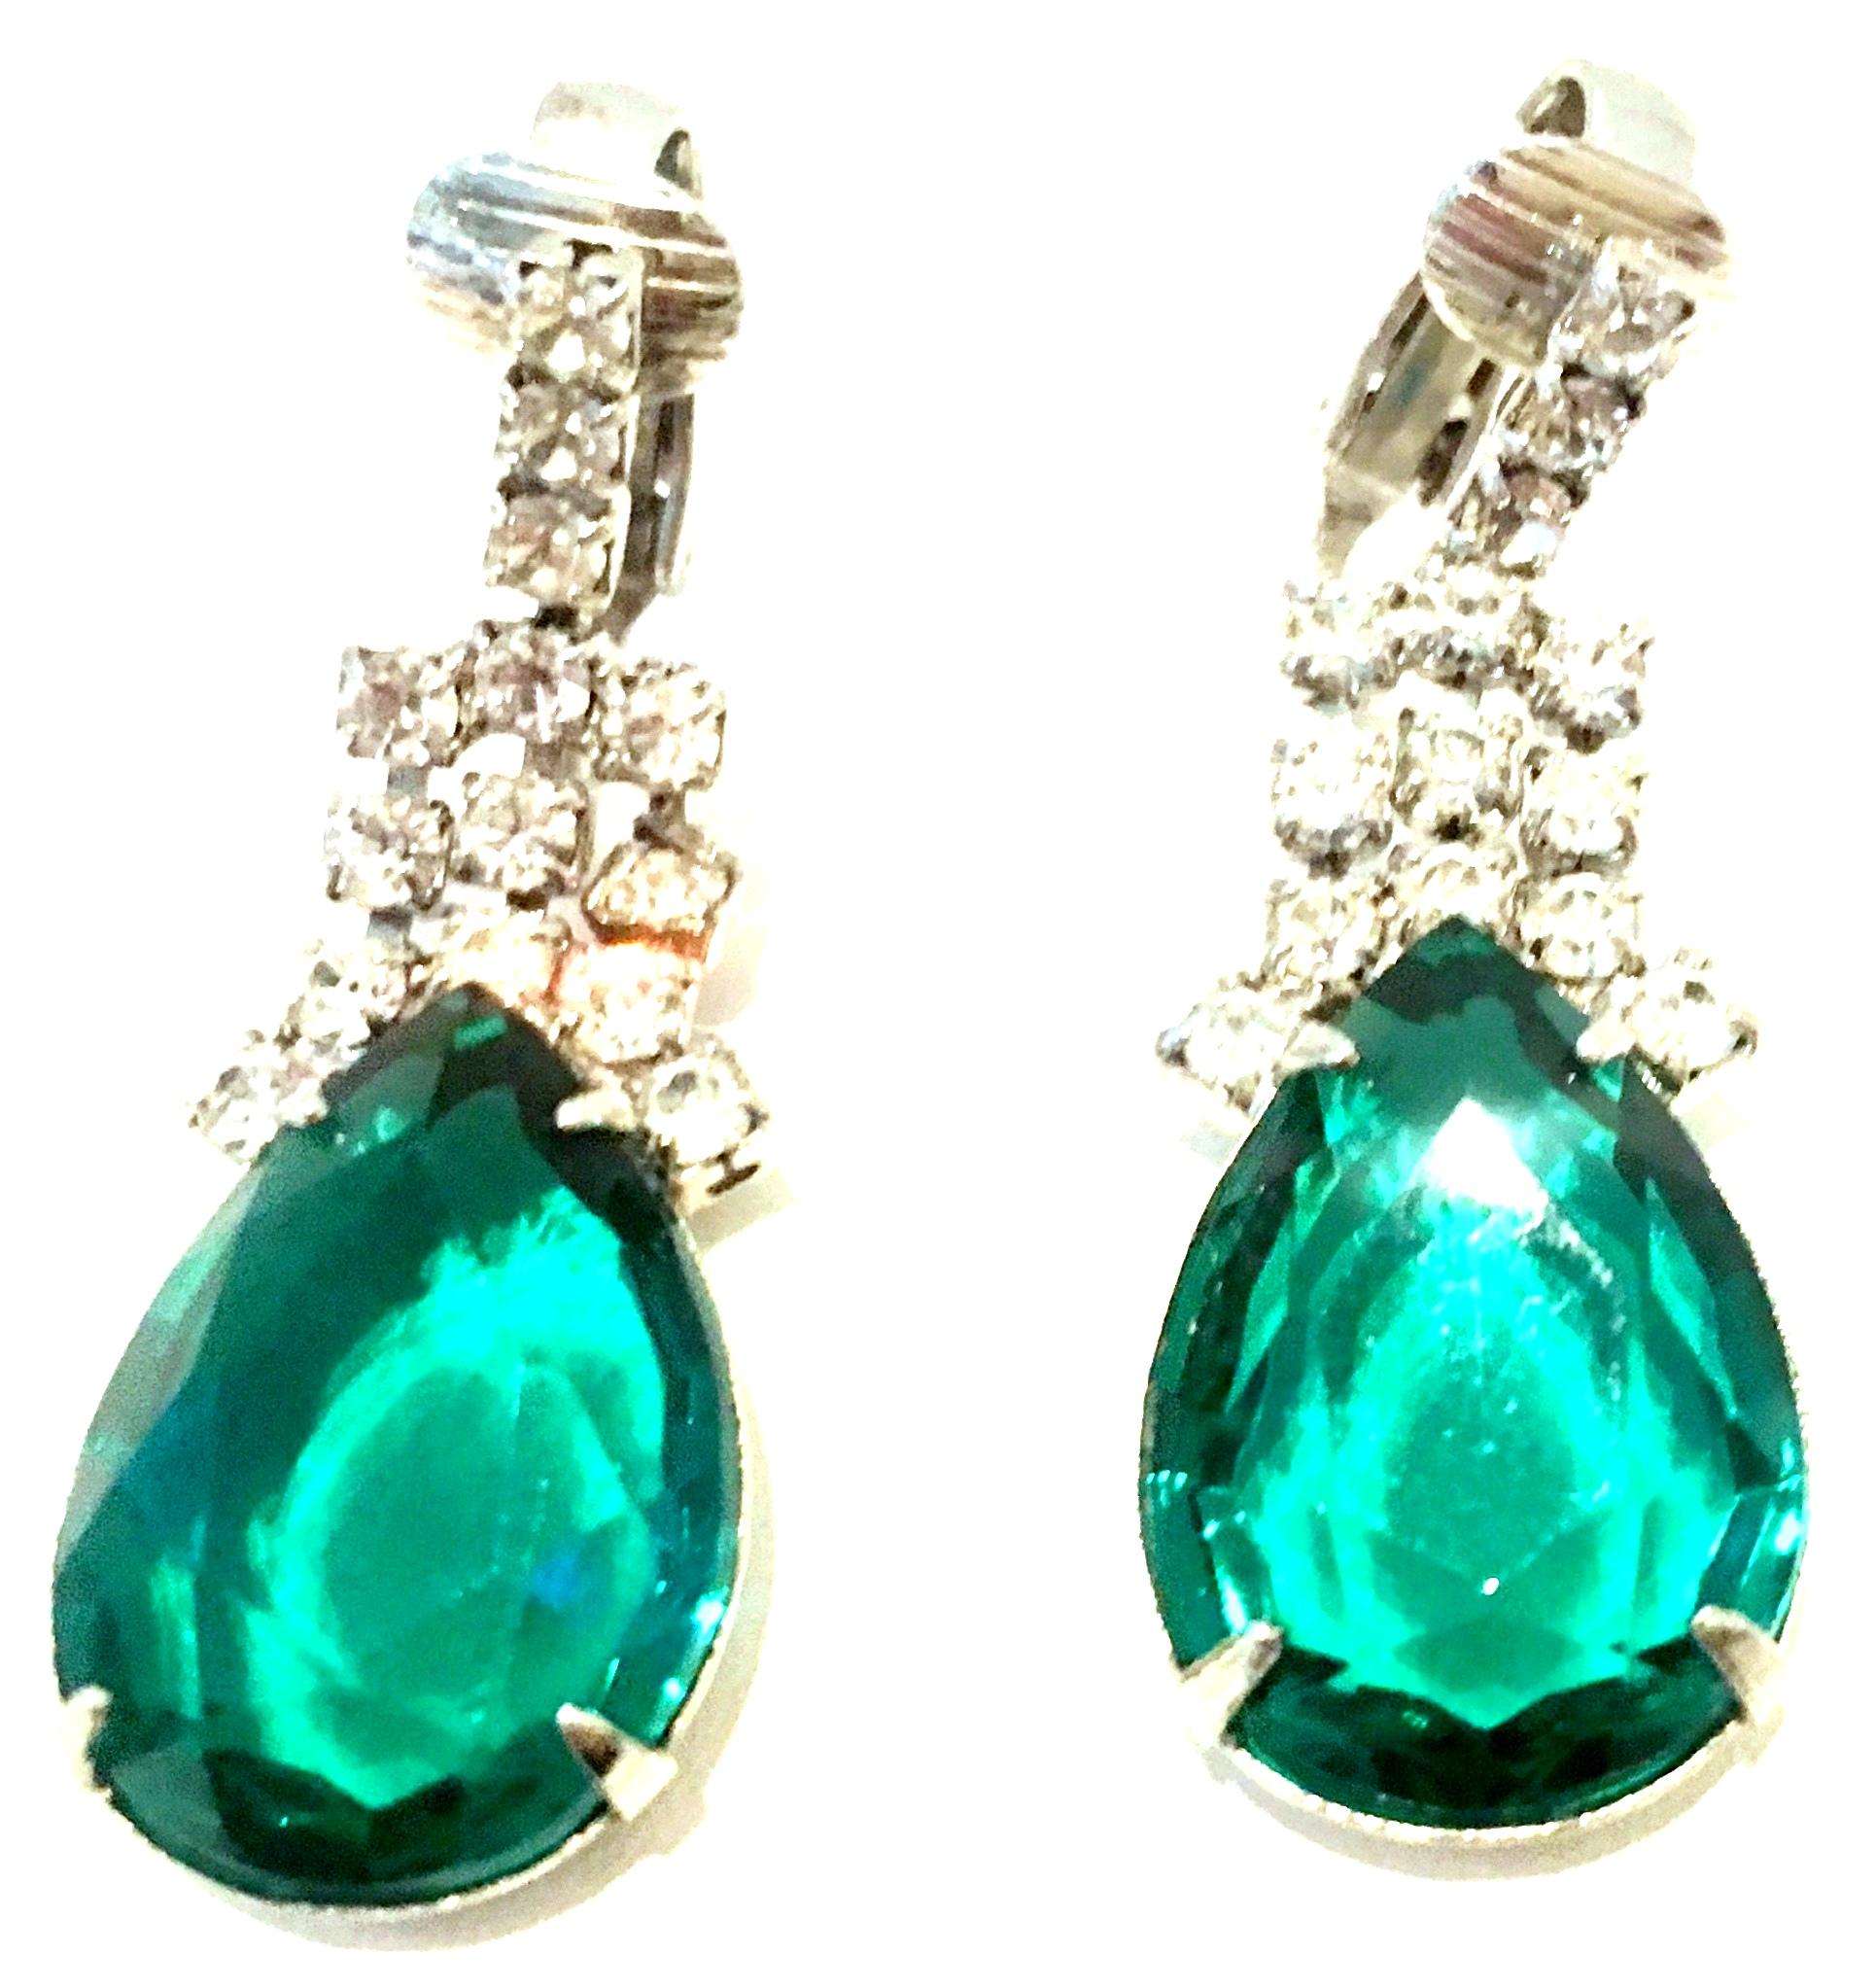 20th Century Pair Of Silver Plate & Swarovski Crystal Drop Earrings These classic and timeless silver rhodium plate clip style earrings have been executed with the highest quality of brilliant cut and faceted emerald green and colorless crystal